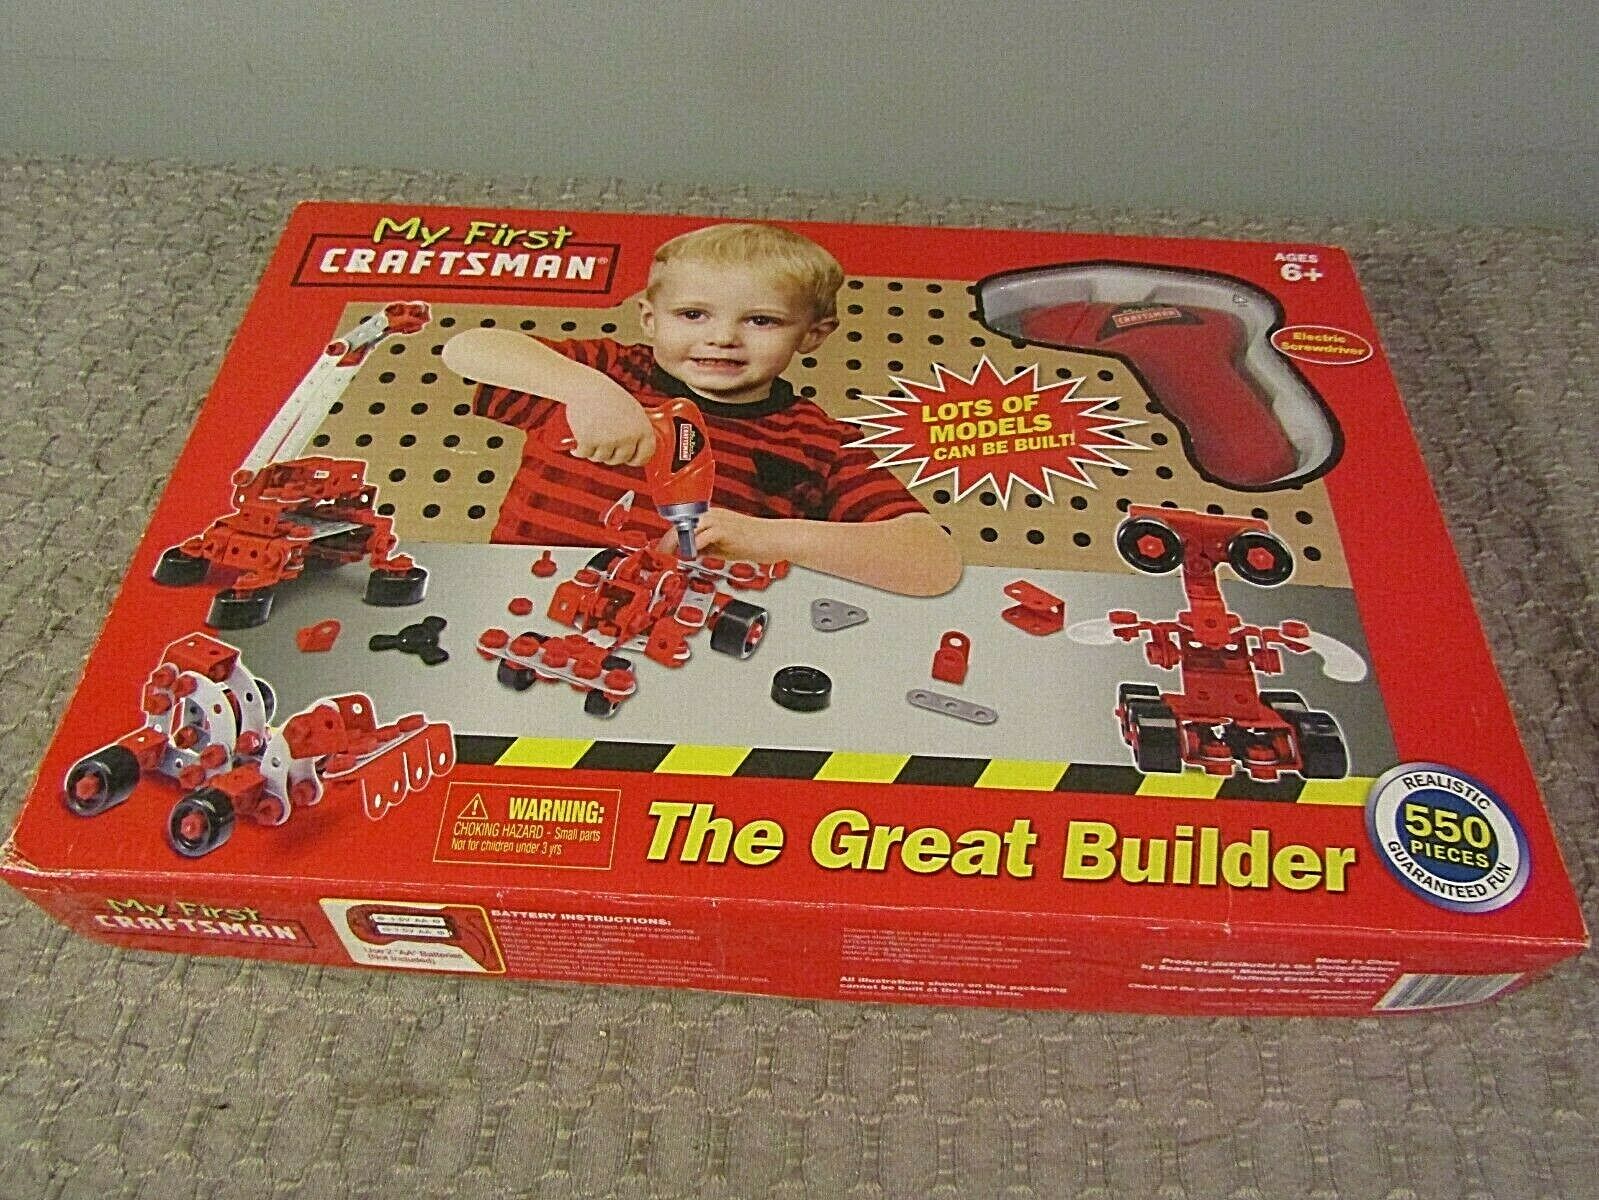 My First Craftsman Great Builder Set 550 Piece Electric Screwdriver New In Box!!